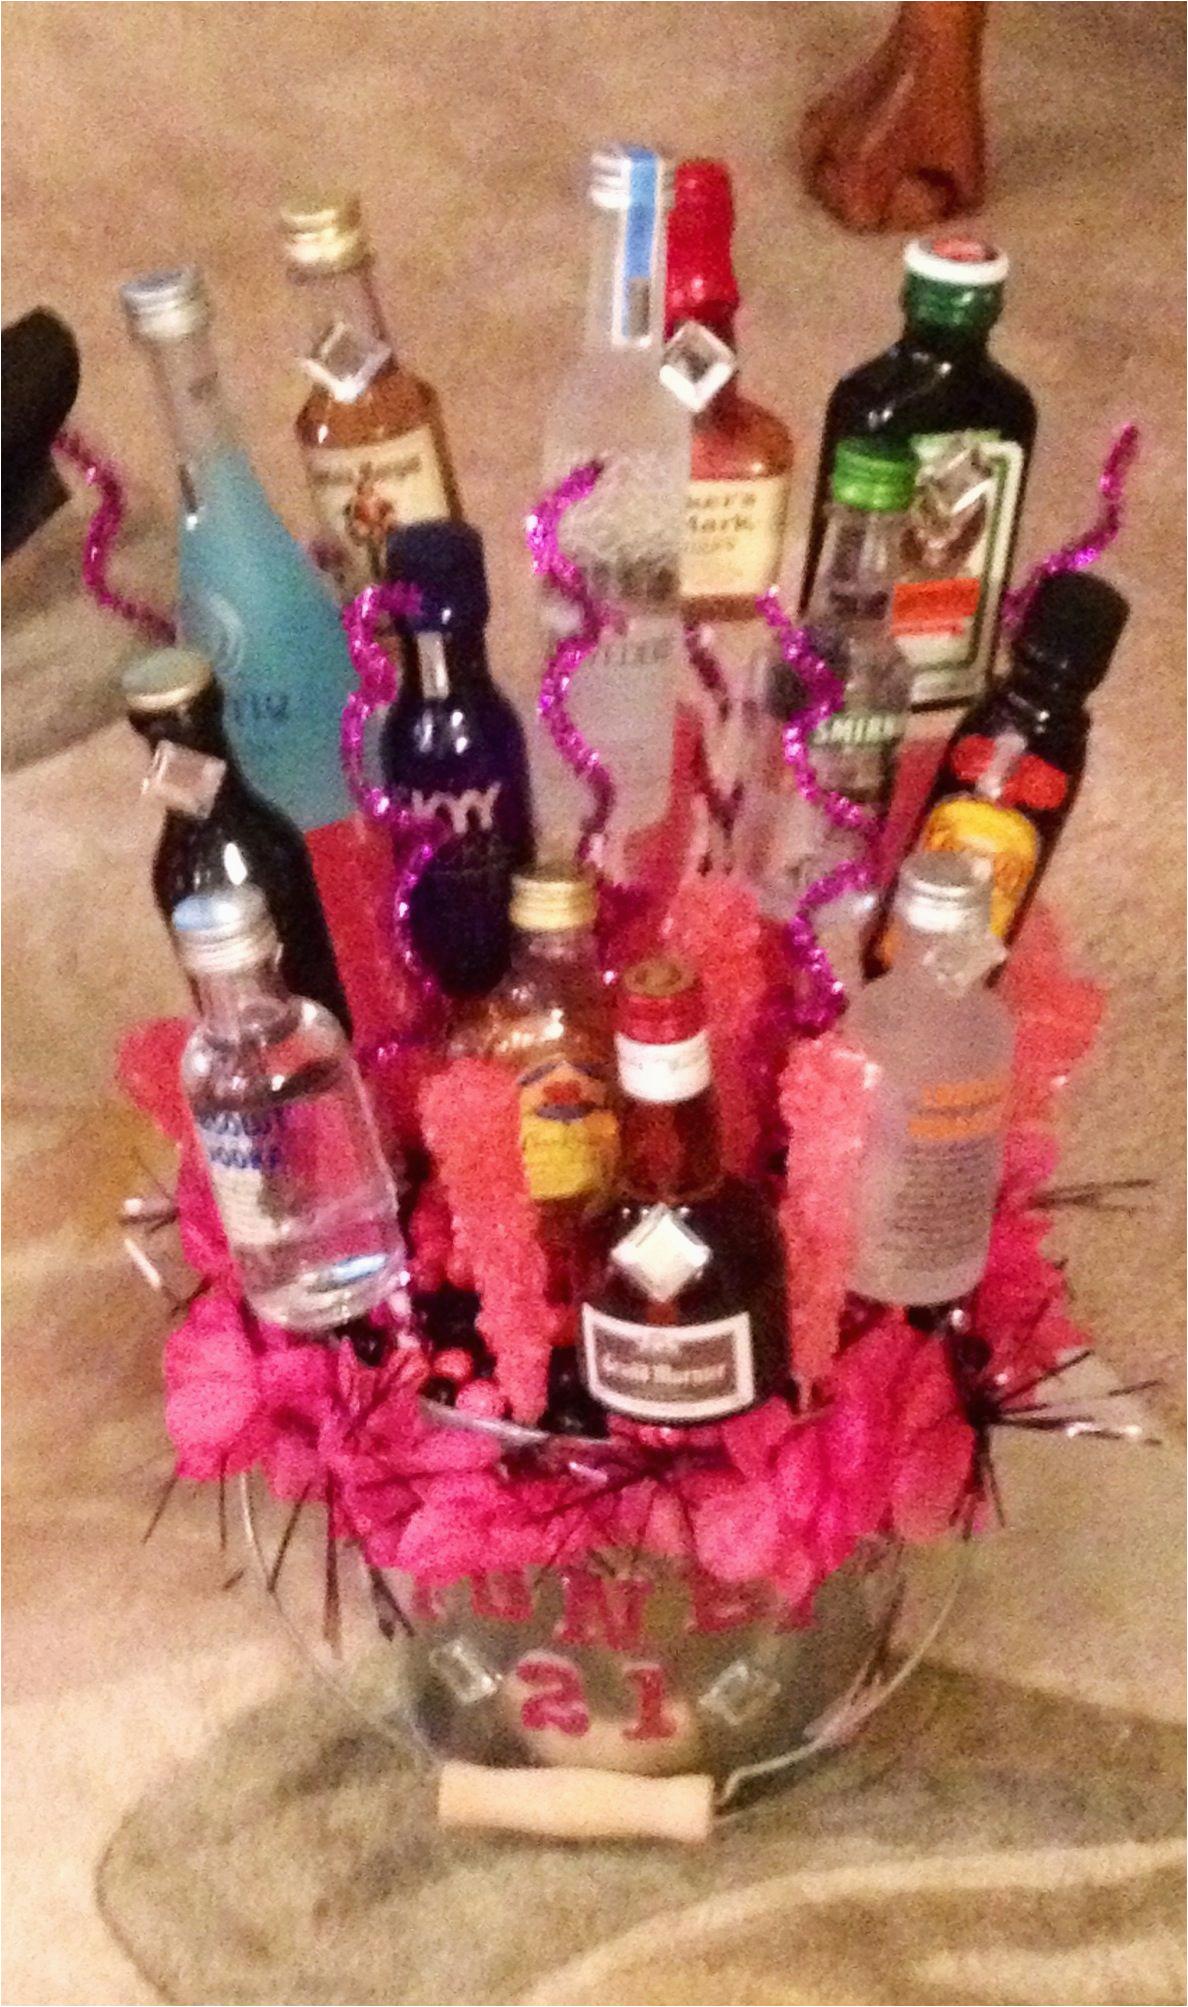 made an edible alcohol basket for my dear friend for her